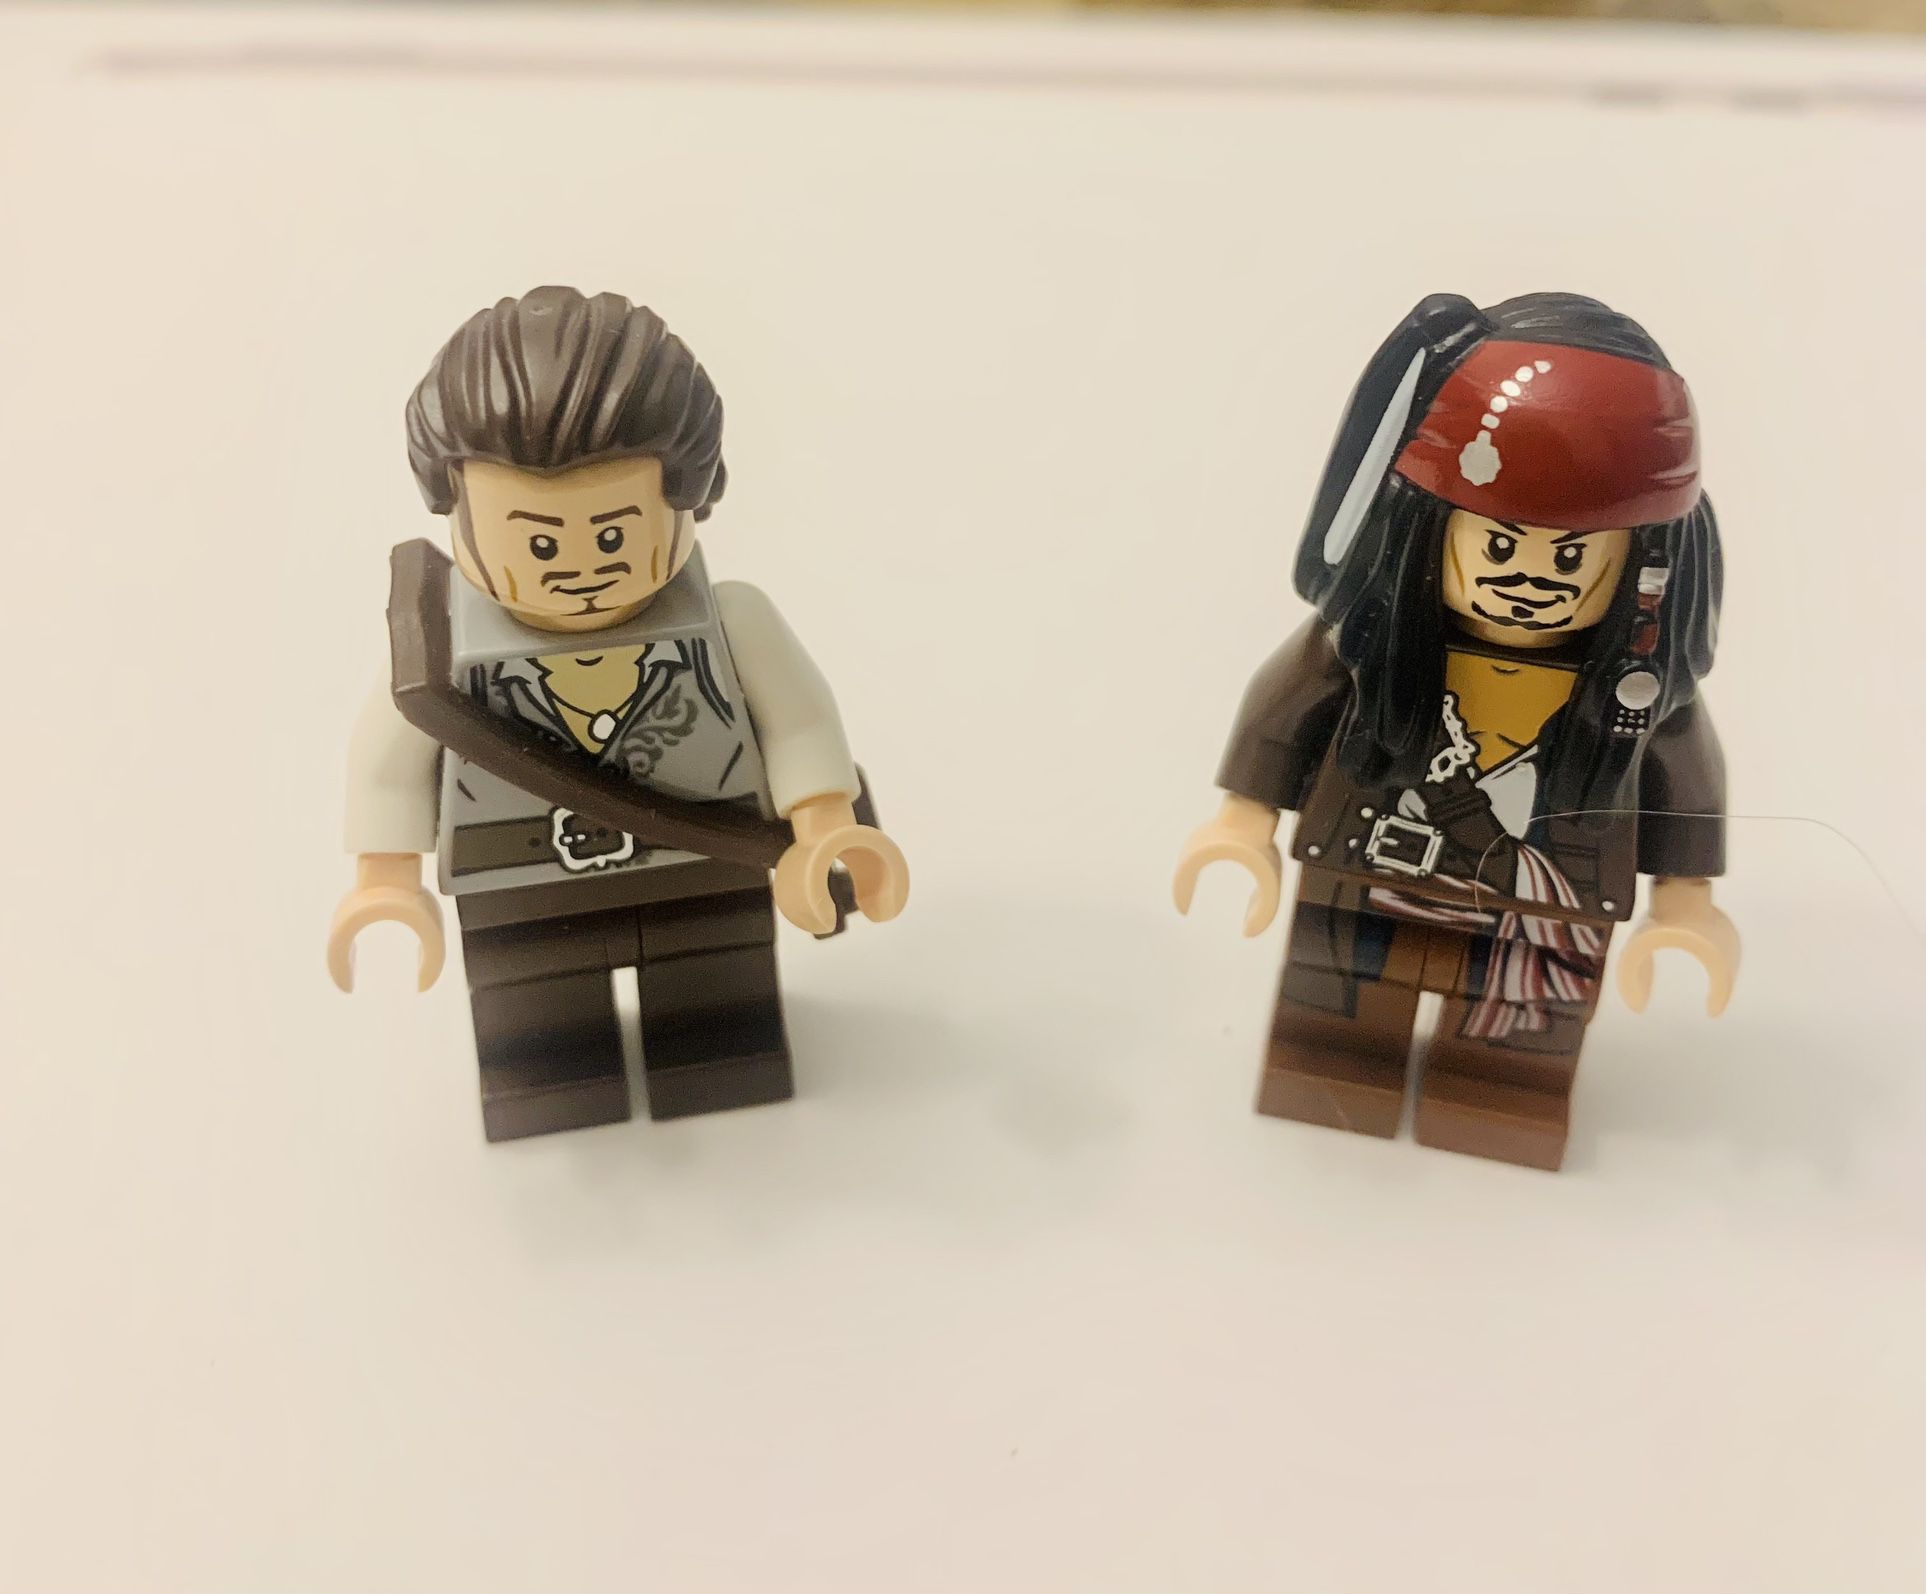 Necessities Et kors rendering Lego Pirates Of The Caribean Jack Sparrow and Will Turner Minifigures for  Sale in Denver, CO - OfferUp